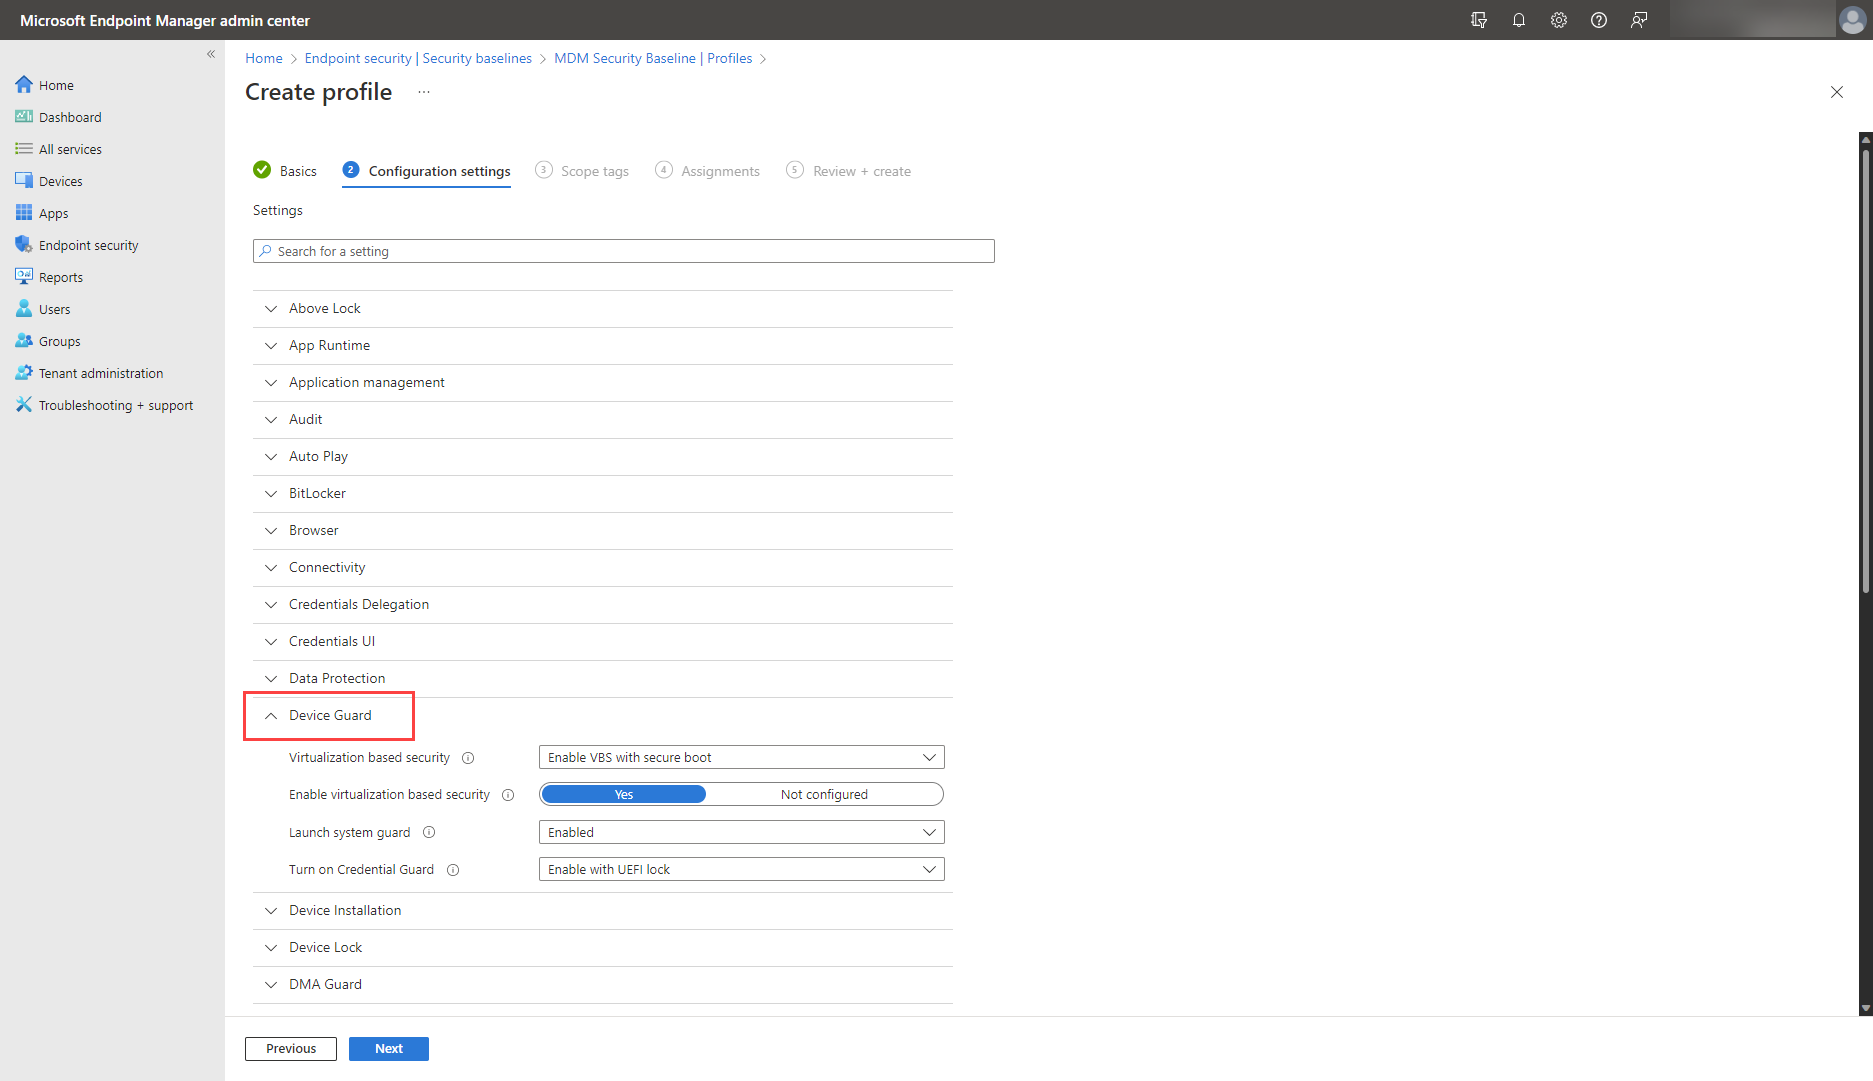 A screenshot of the Configure Launch system guard with security baselines in Microsoft Intune.